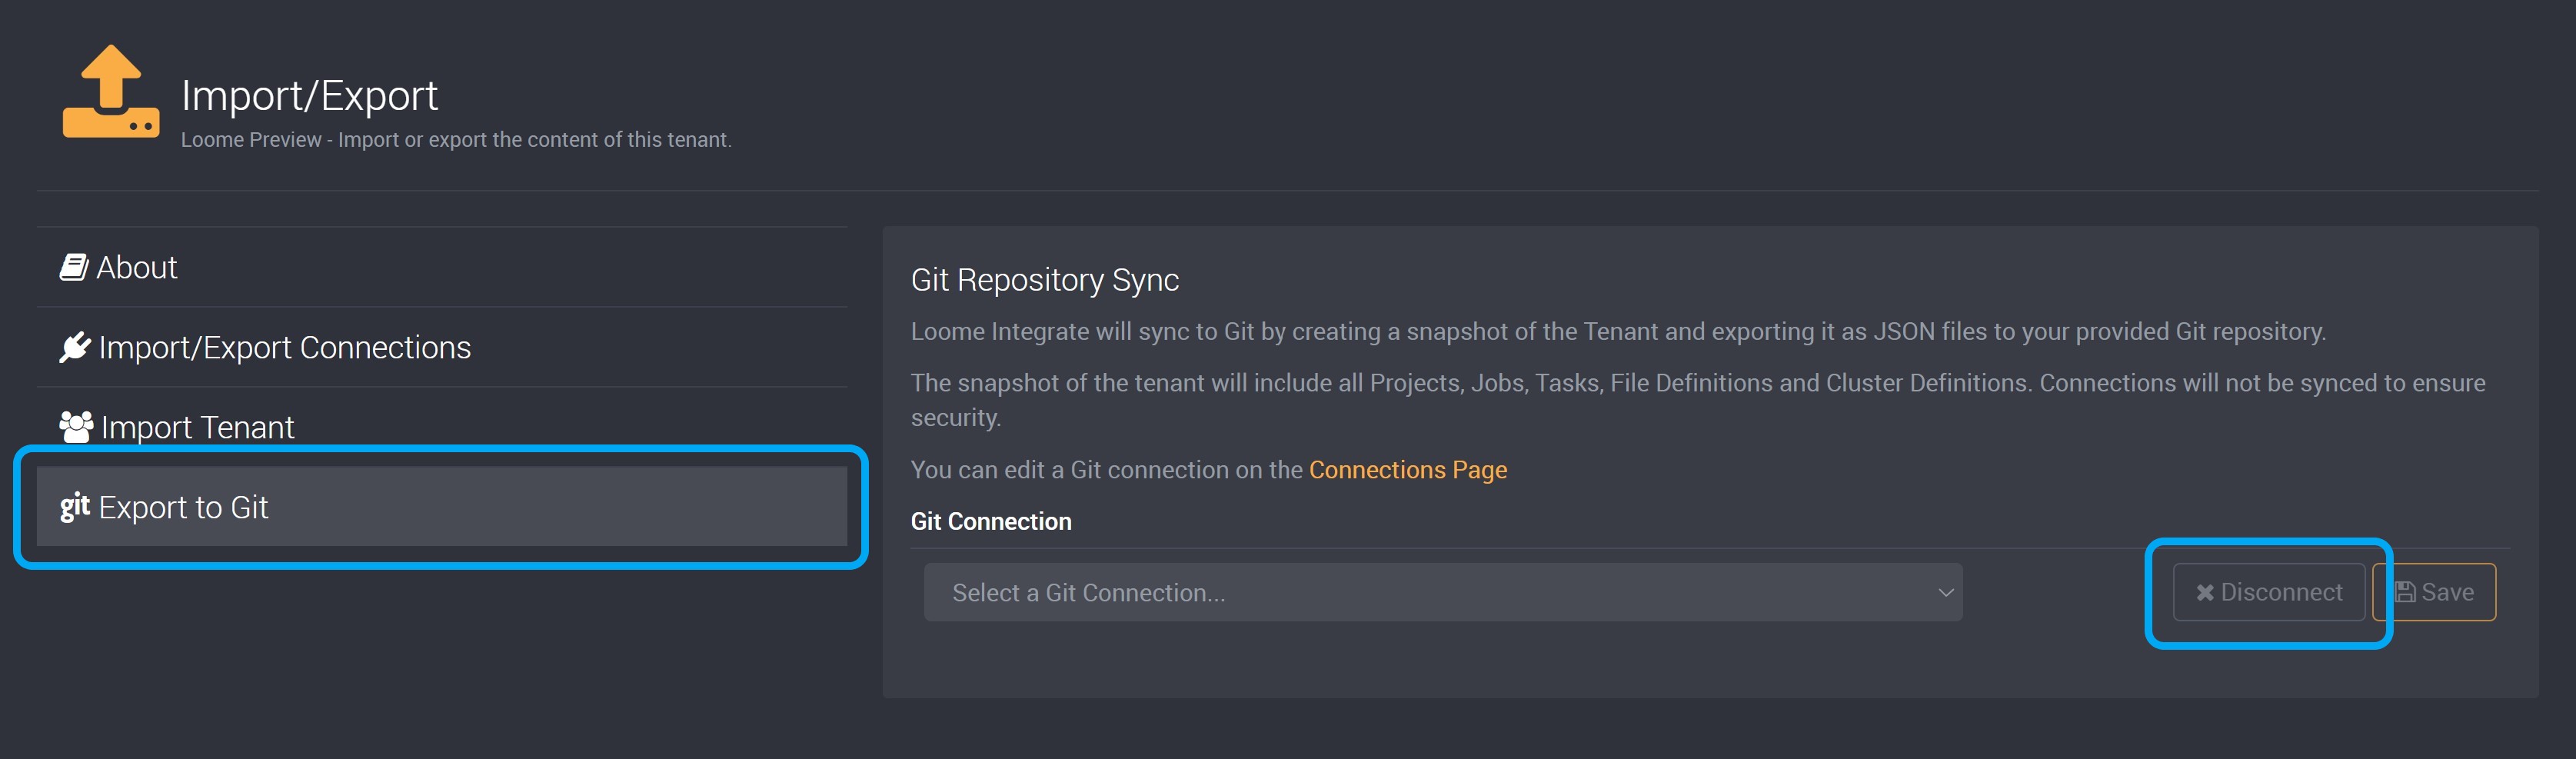 Deselect your Git Repository